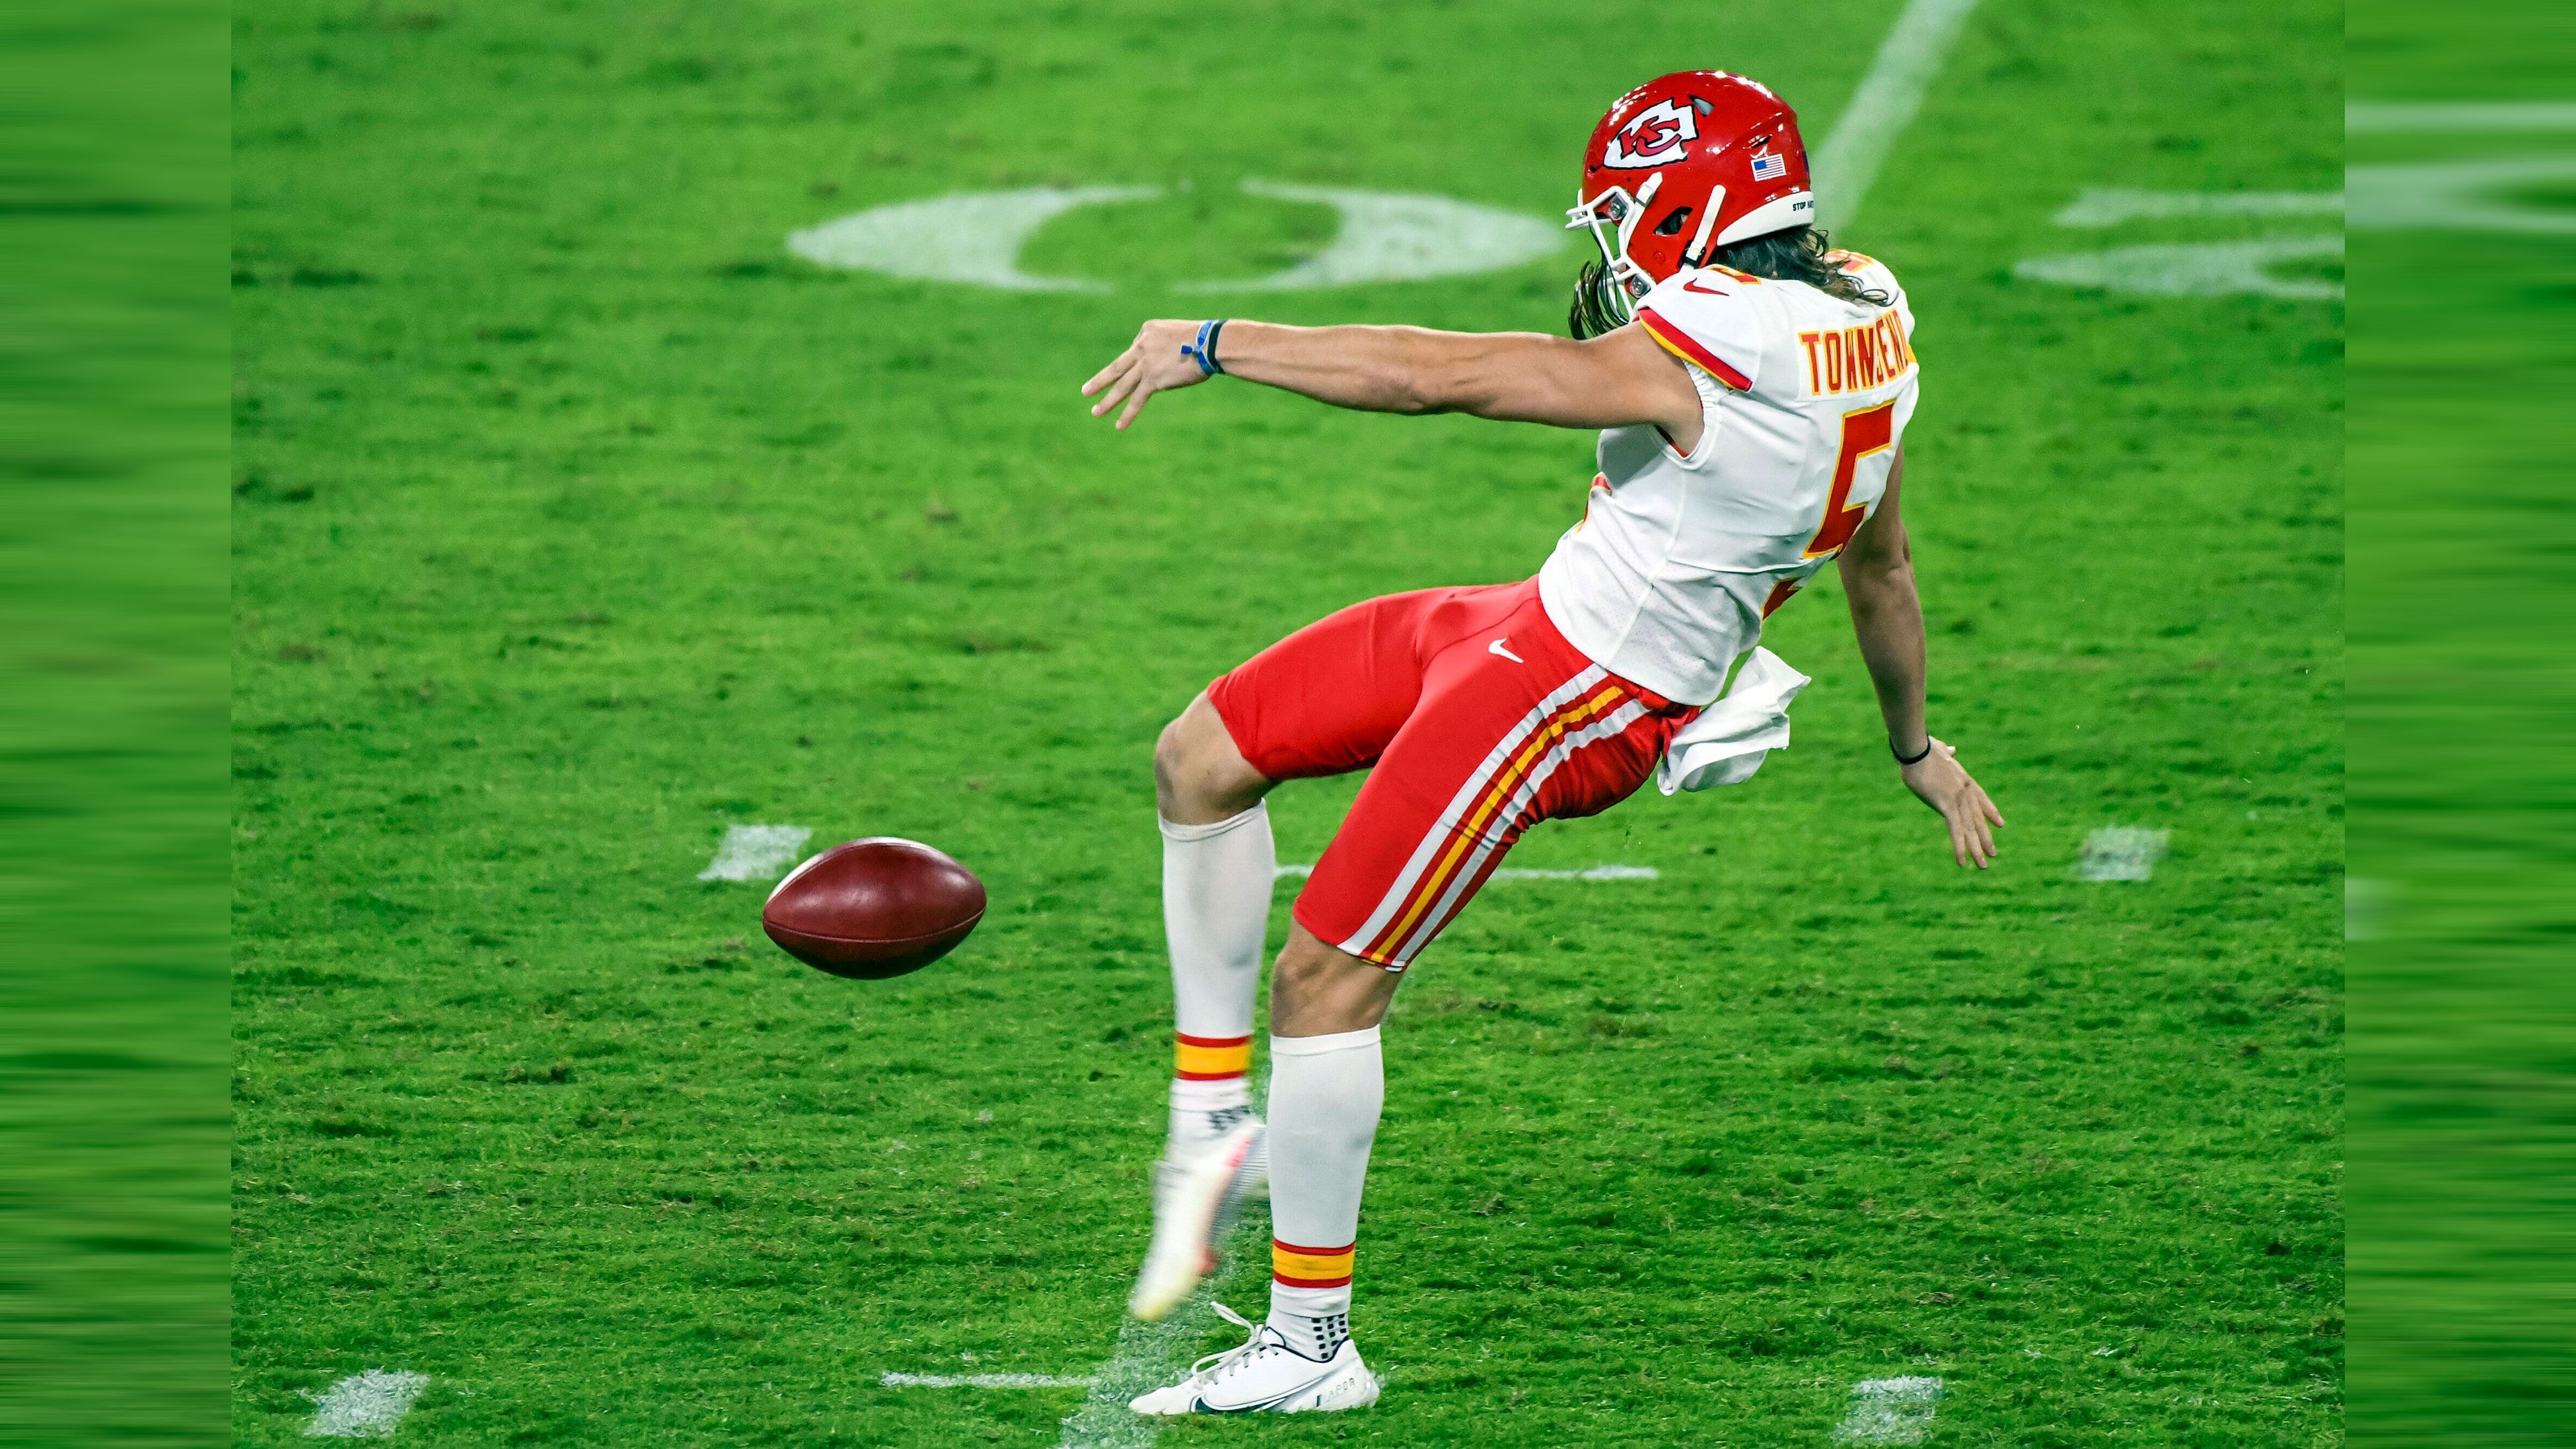 
                <strong>Tommy Townsend (Kansas City Chiefs)</strong><br>
                Position: Punter - Gedraftet: undrafted - NFL-Spiele: 21 - Wichtigste Statistiken: 78 Punts, 3602 Yards, 46,2 Yards pro Punt - 
              